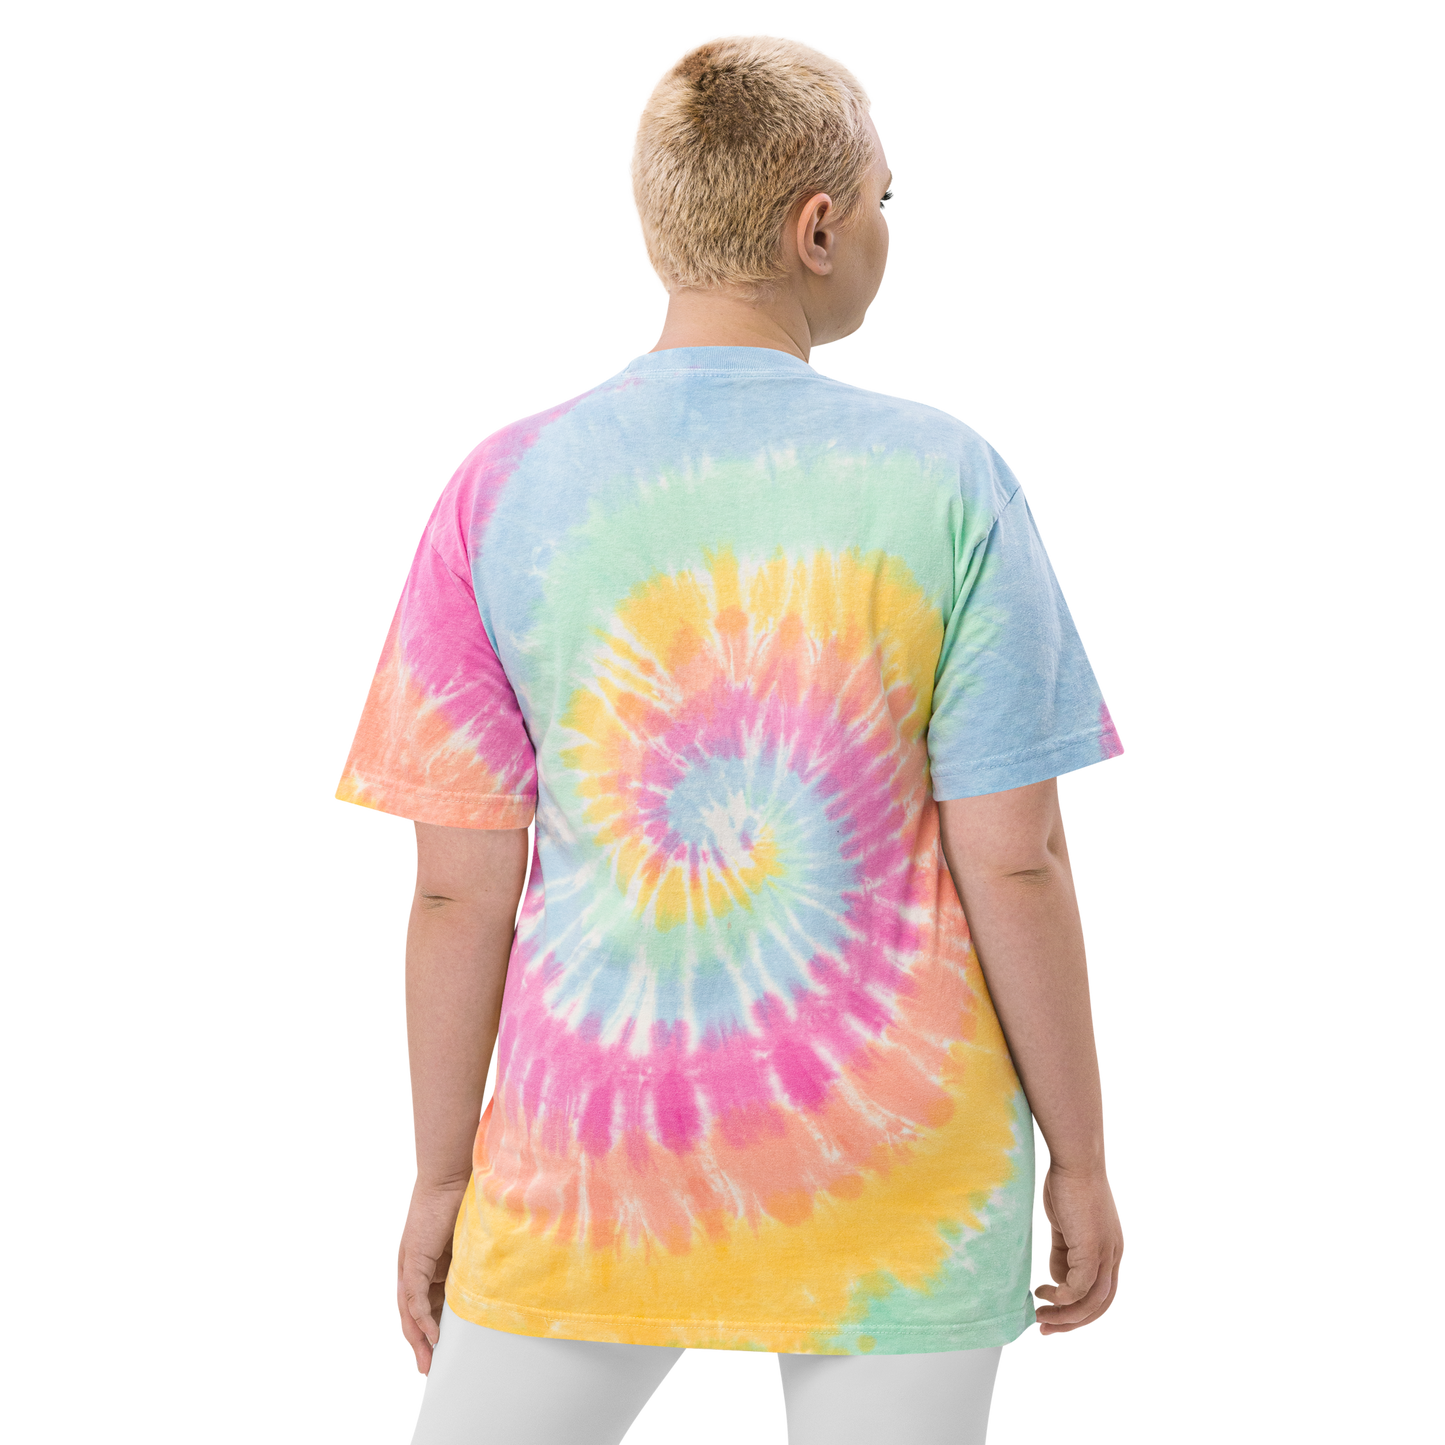 YHM Designs - YFC Fredericton Oversized Tie-Dye T-Shirt - Crossed-X Design with Airport Code and Vintage Propliner - White Embroidery - Image 12